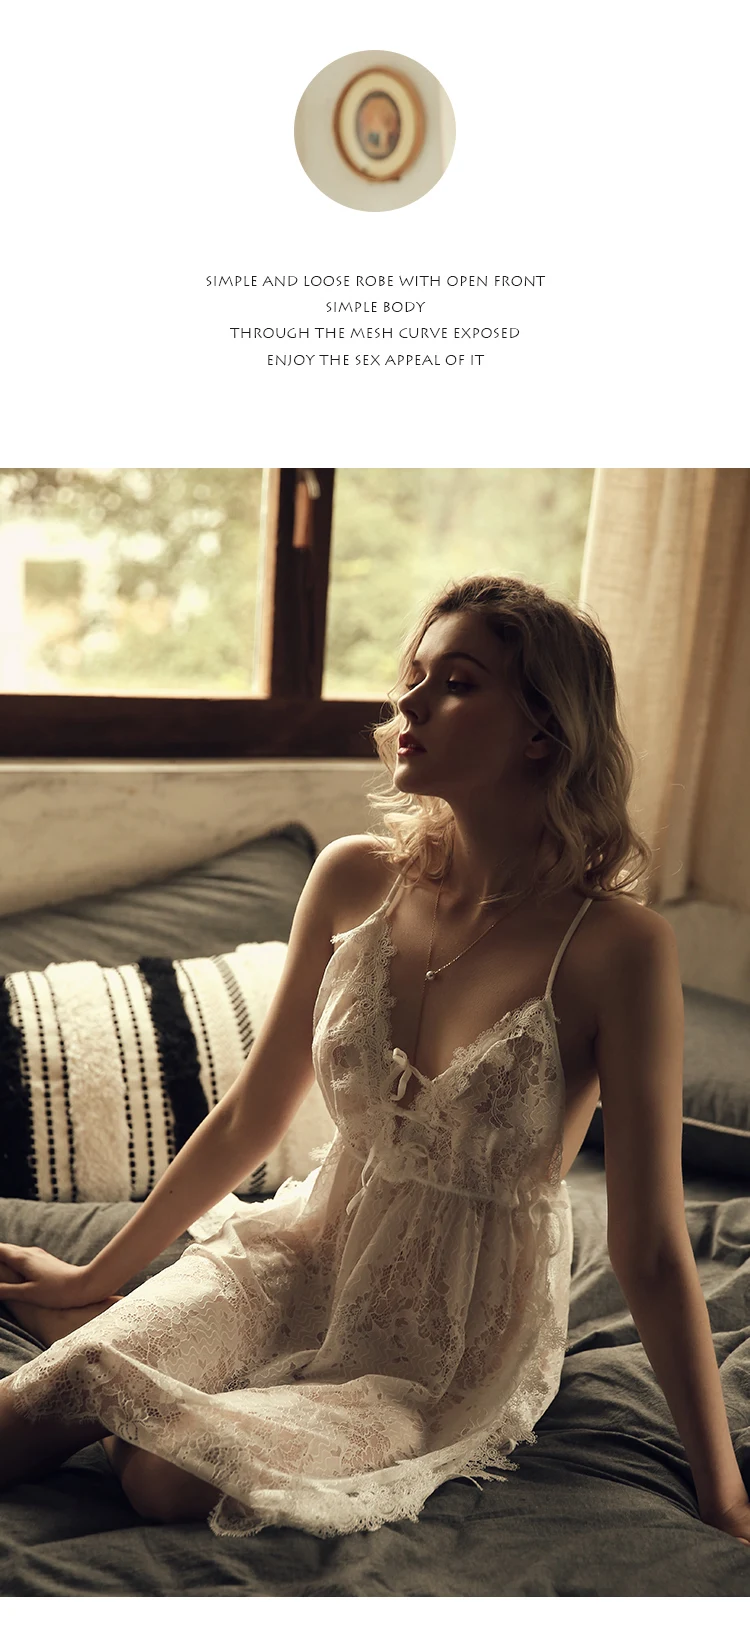 see through lace nightgown 